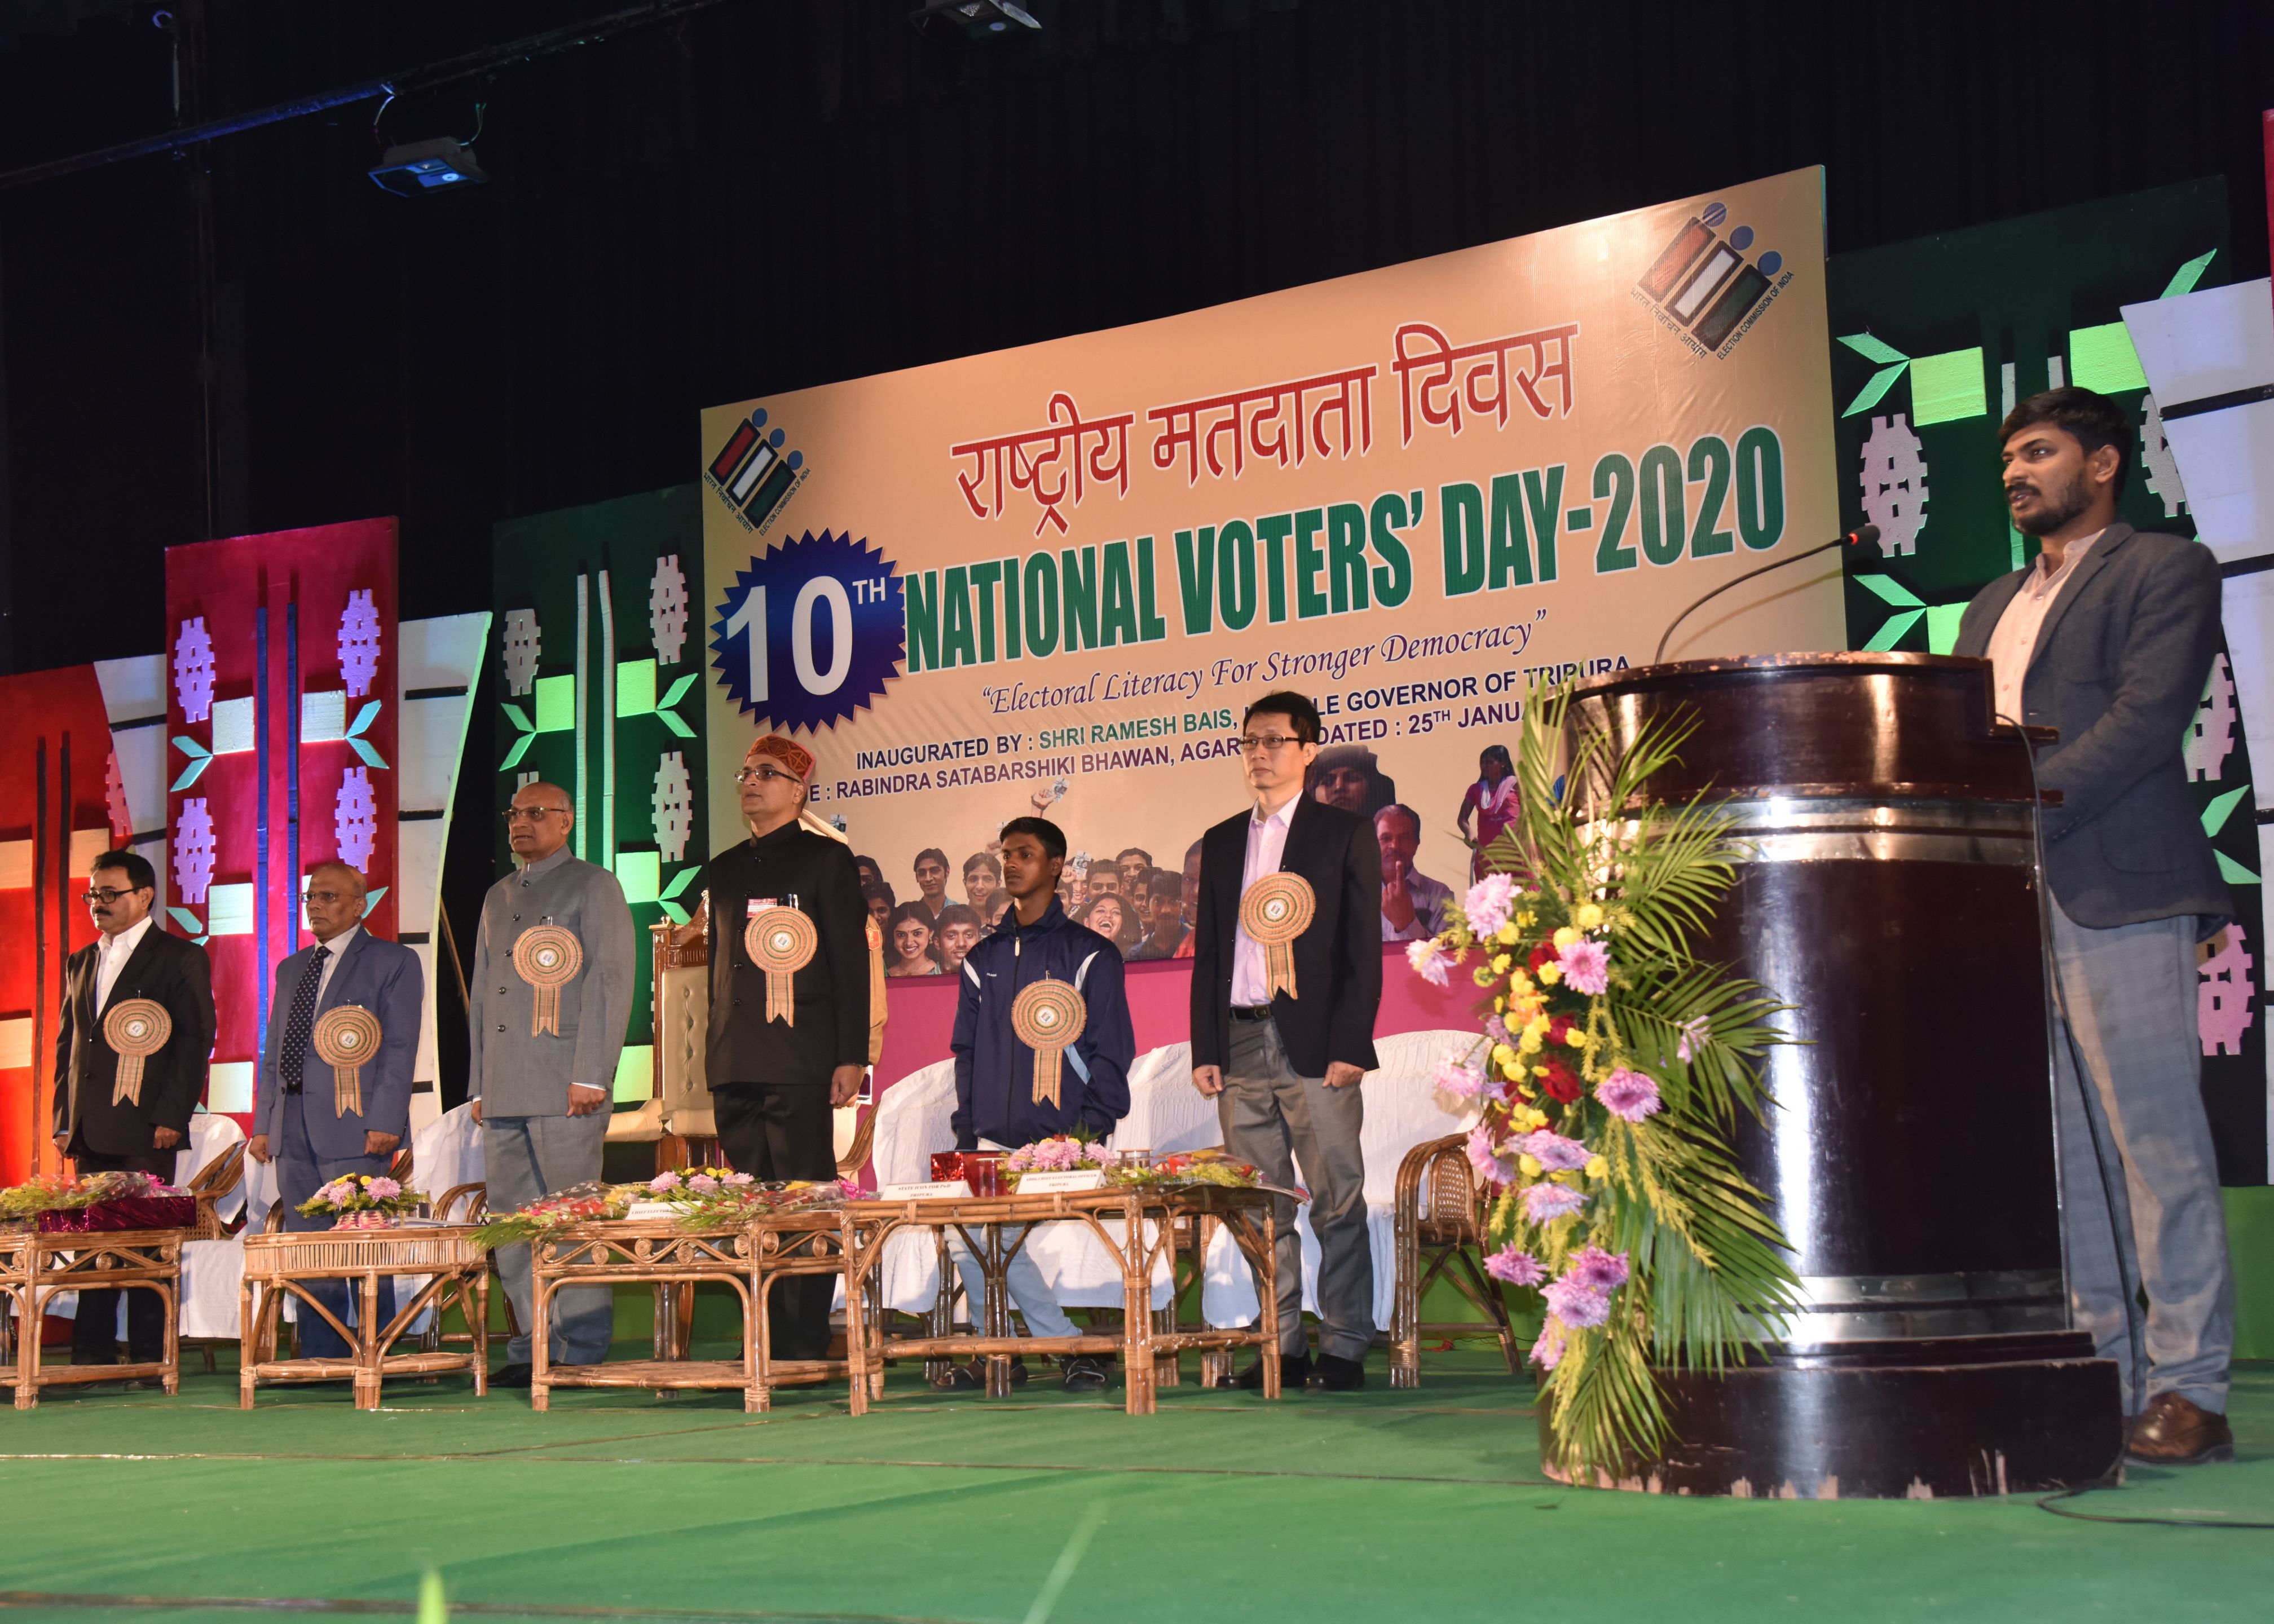 National Voters' Day 2020 in the State of Tripura